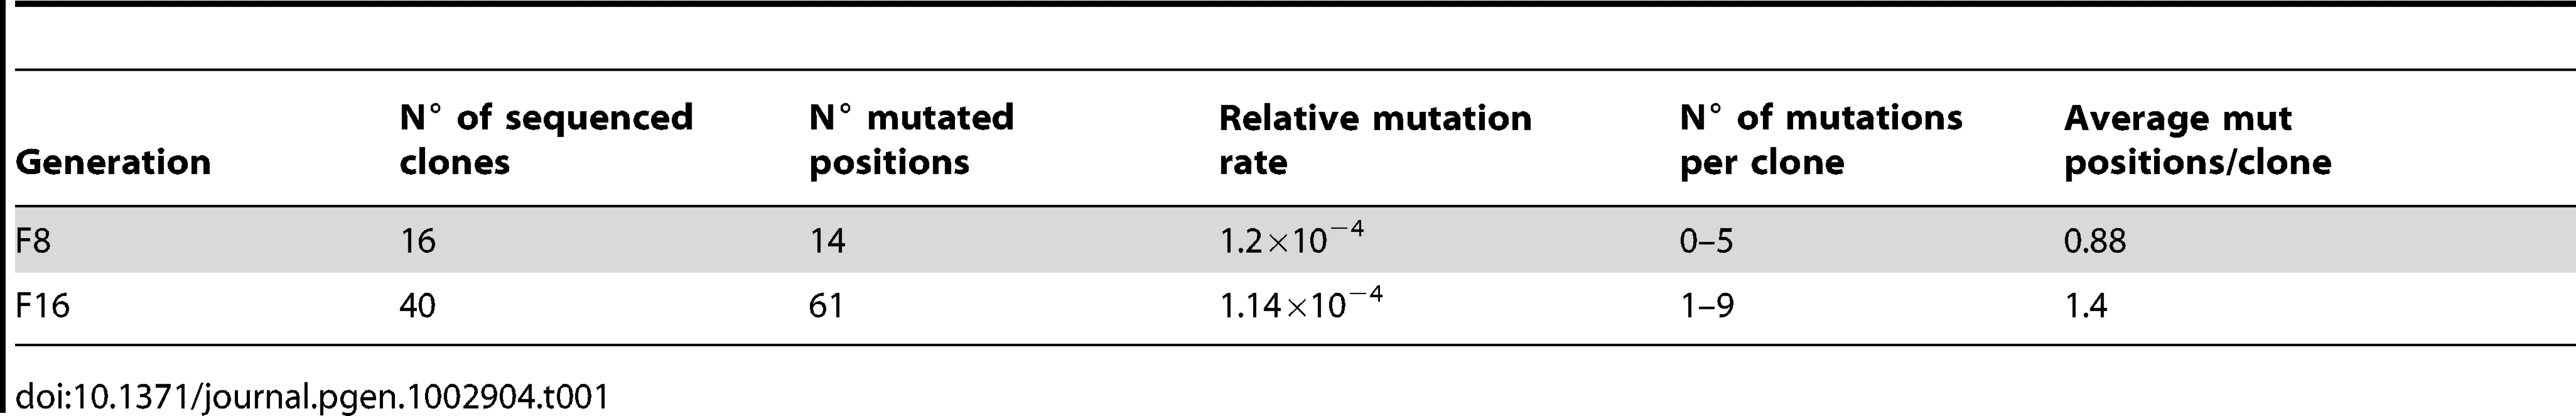 Mutation frequencies for the dCK gene at different steps of the Retrovolution procedure.